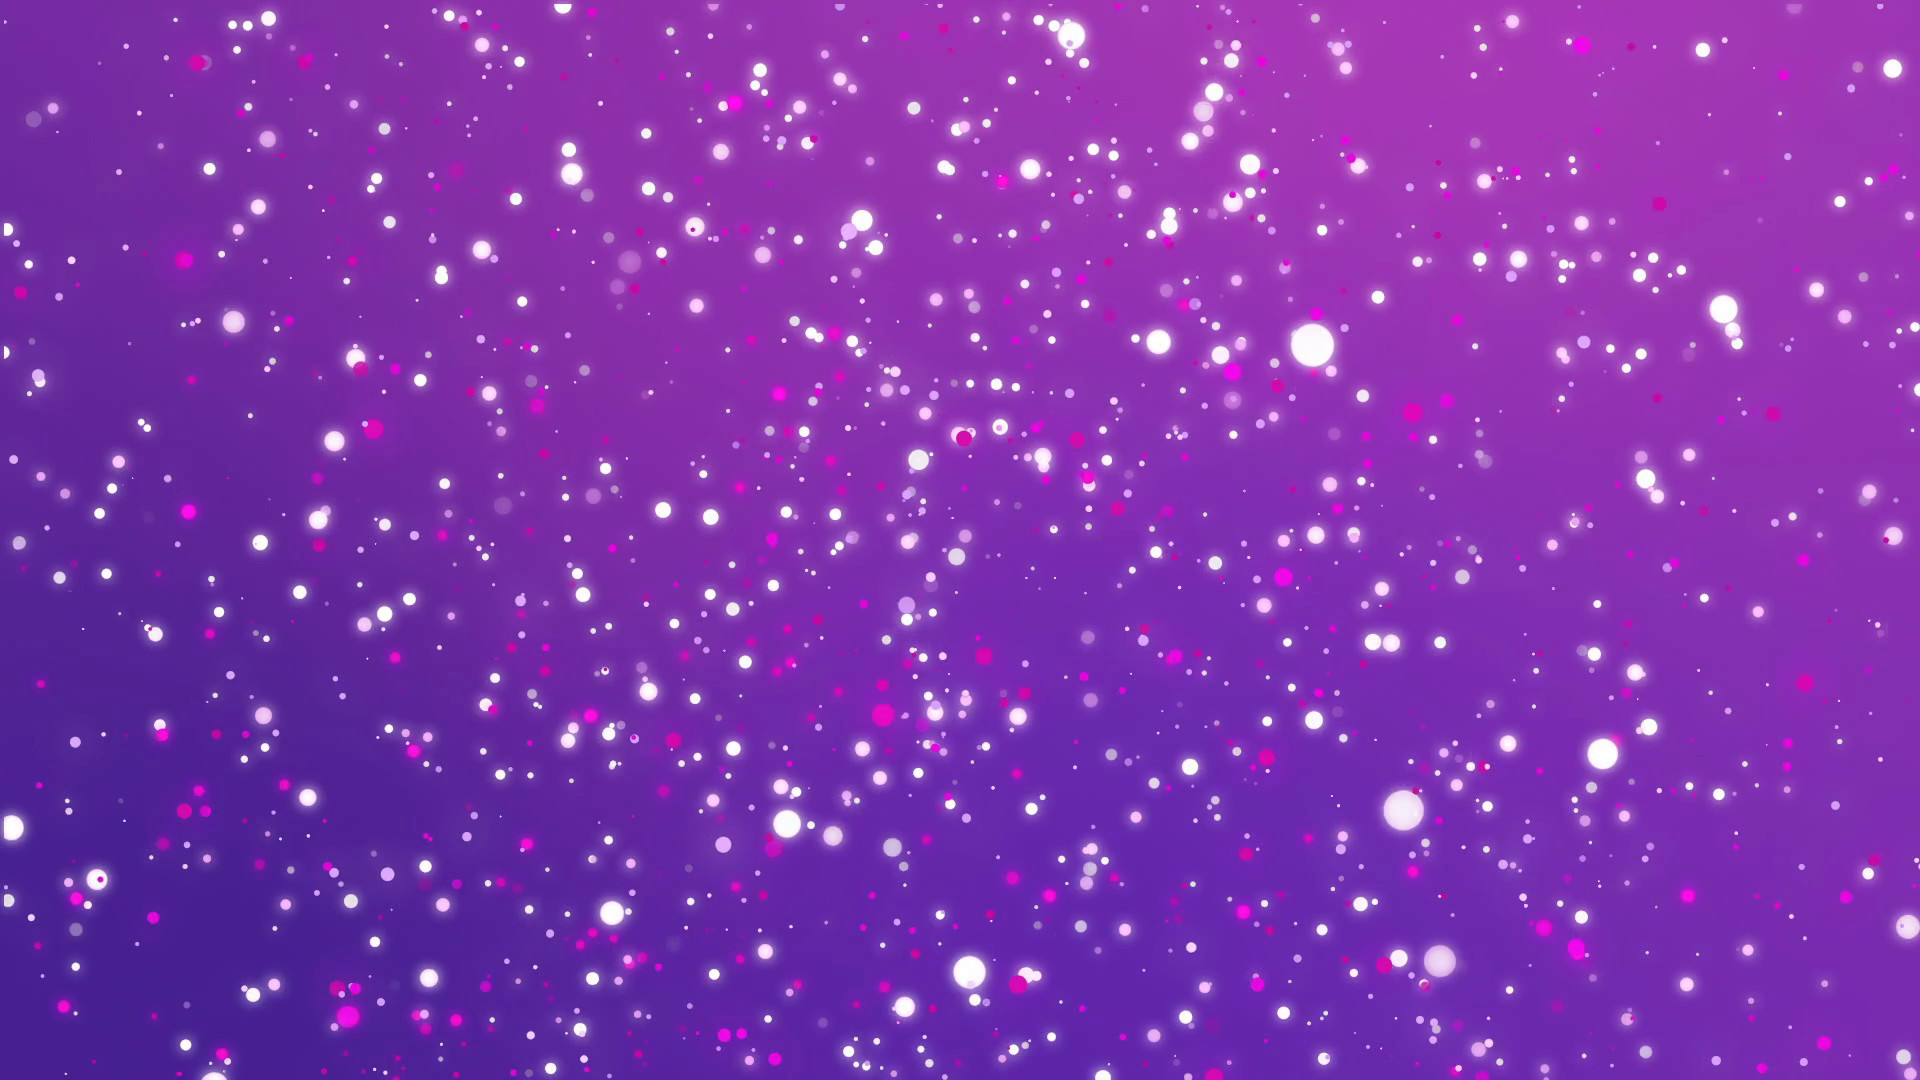 1920x1080 Glitter purple pink background with sparkling colorful light particles